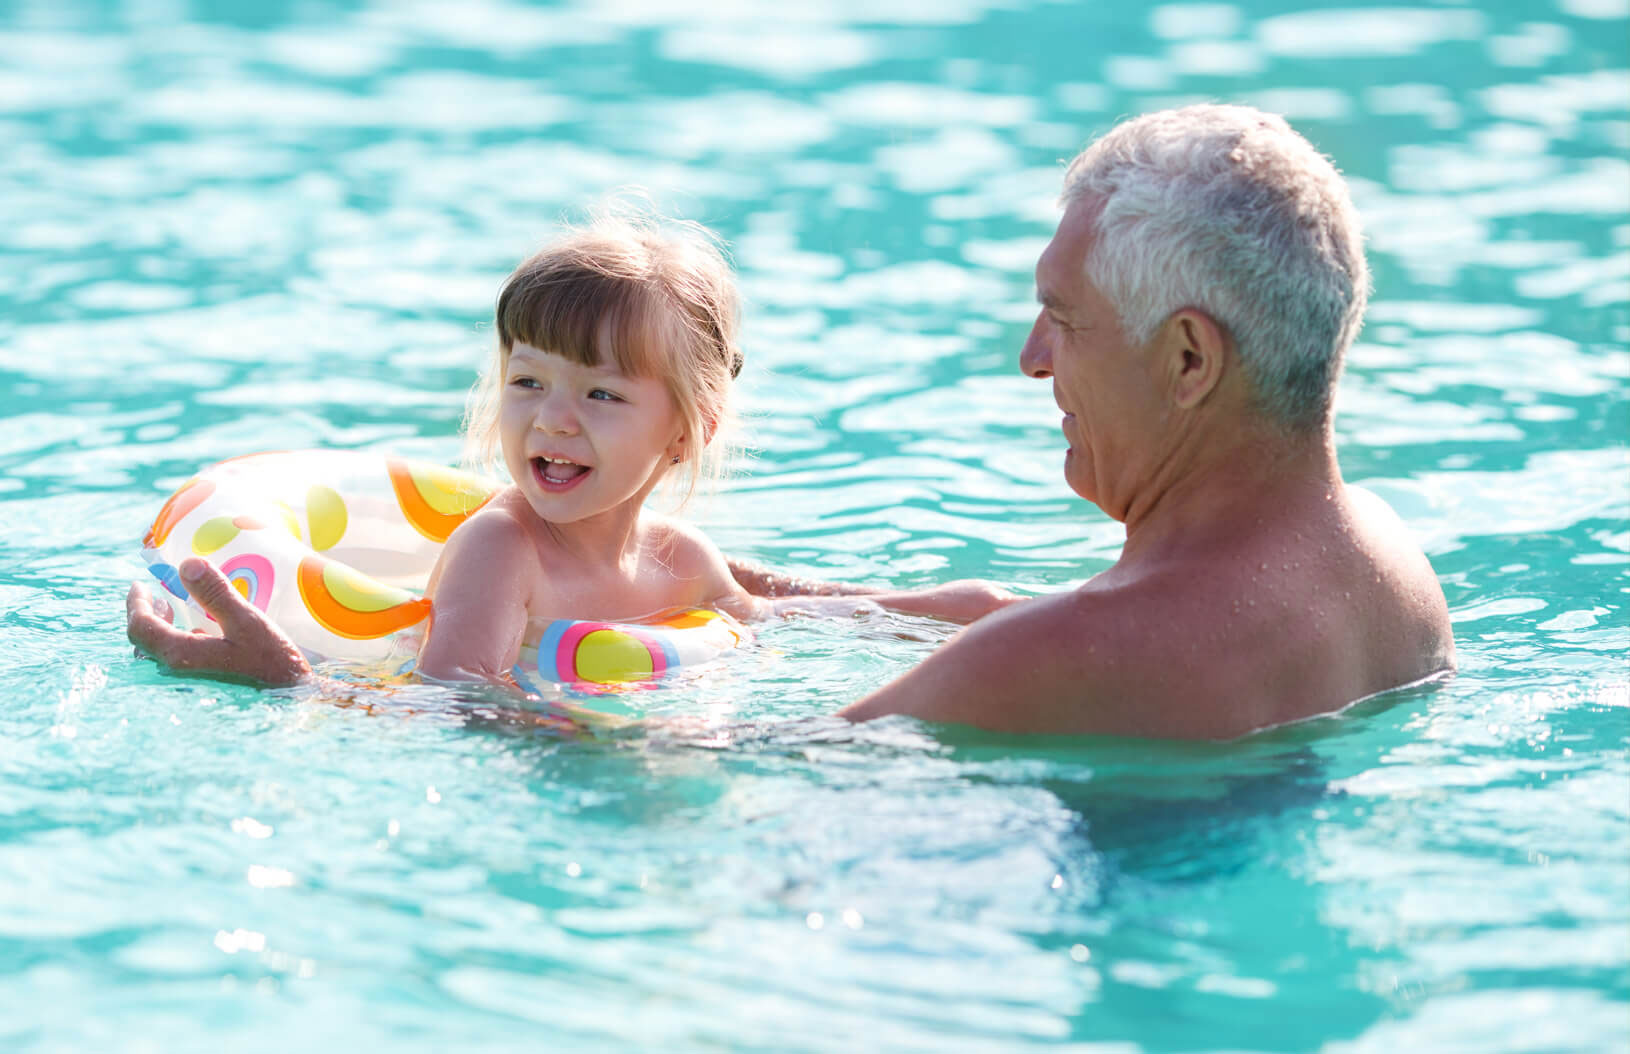 Grandfather and granddaughter in a inflatable inner-tube playing in a pool